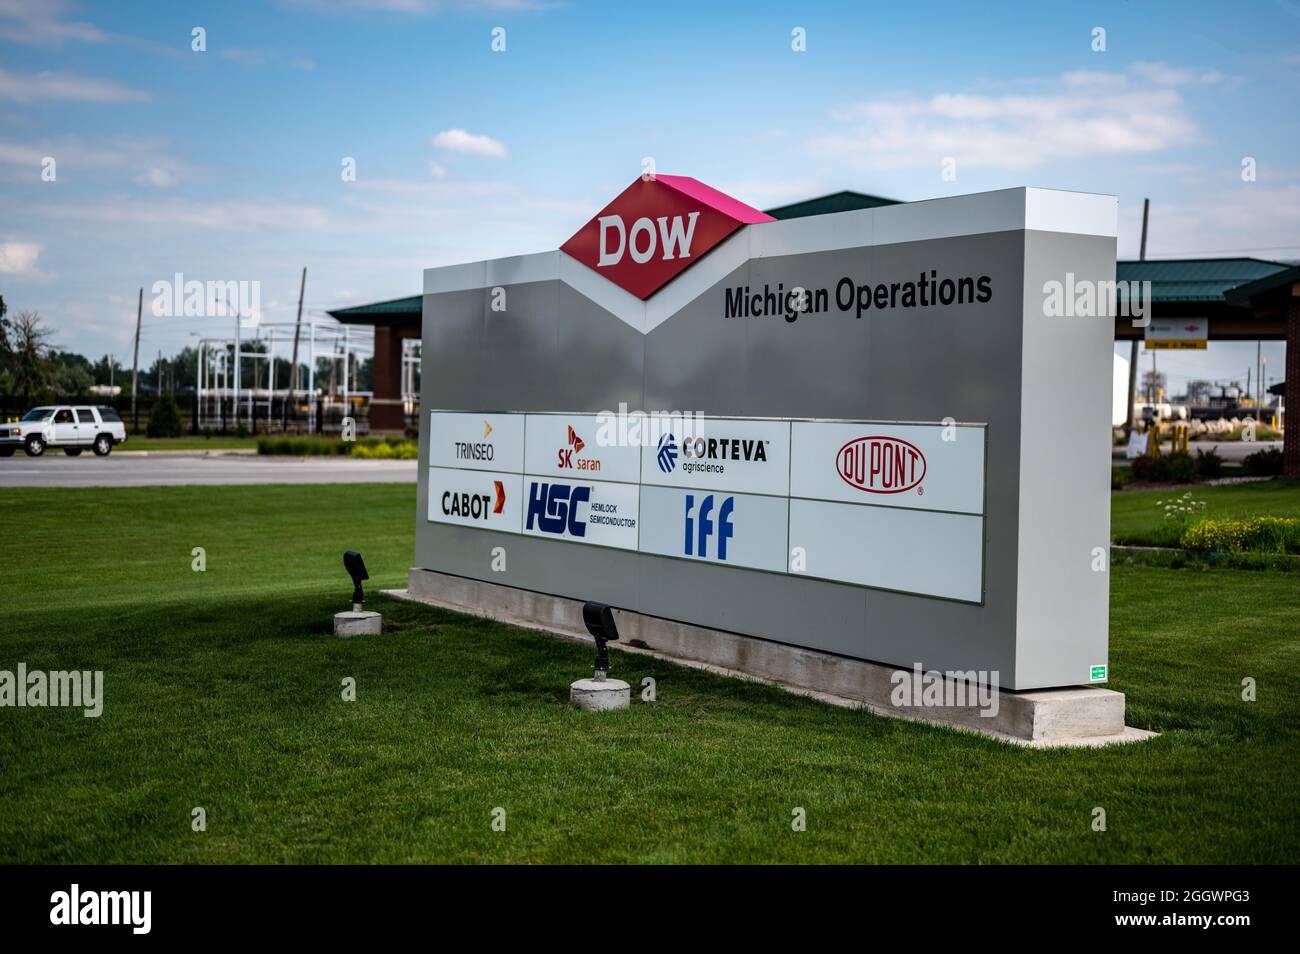 Midland, Michigan, USA - 8.18.2021: Entrance sign to the DOW Industrial Complex industrial center Stock Photo